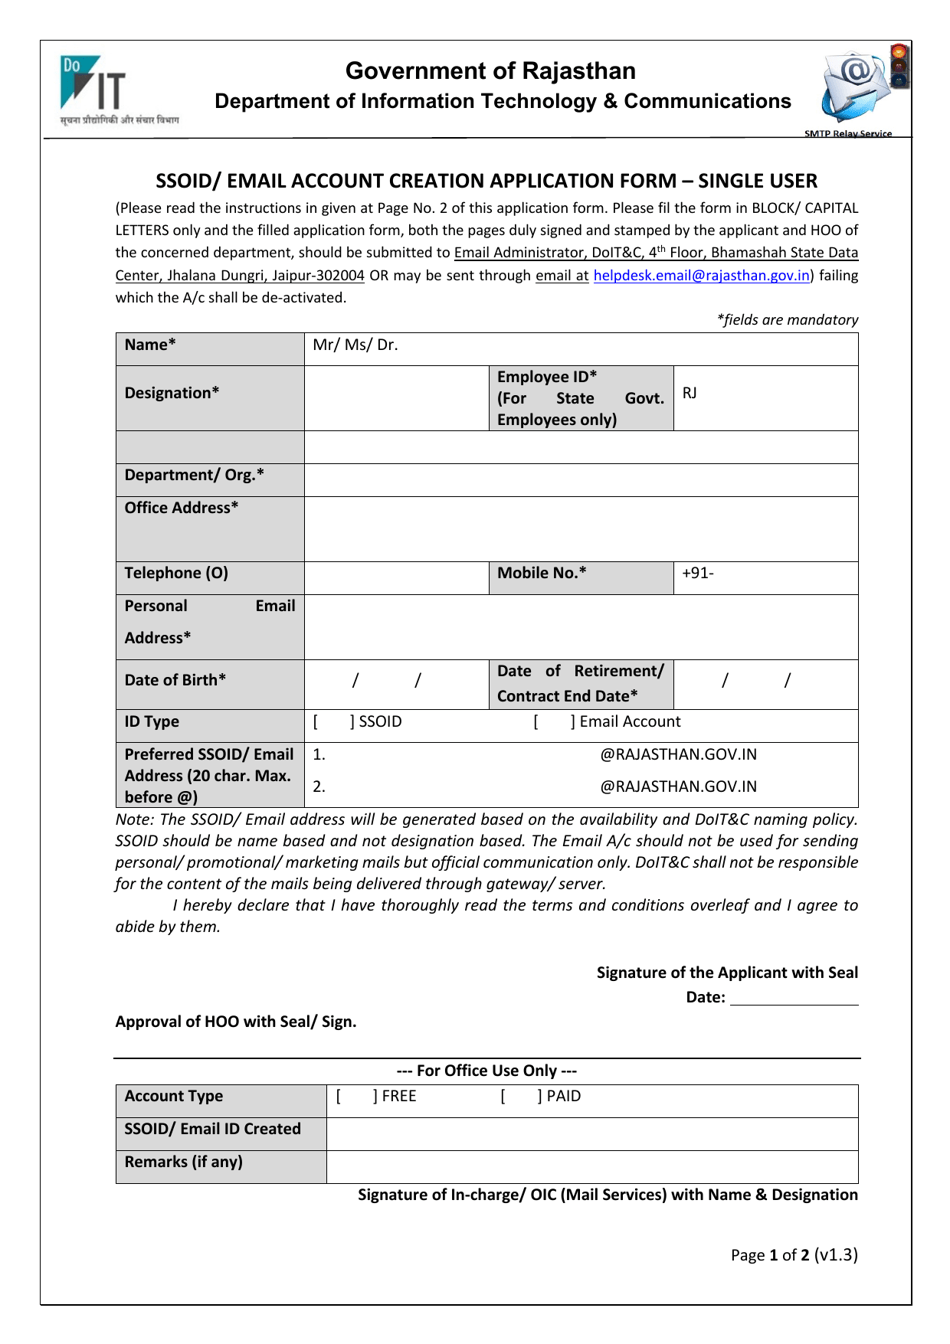 Ssoid / Email Account Creation Application Form - Single User - Rajasthan, India, Page 1